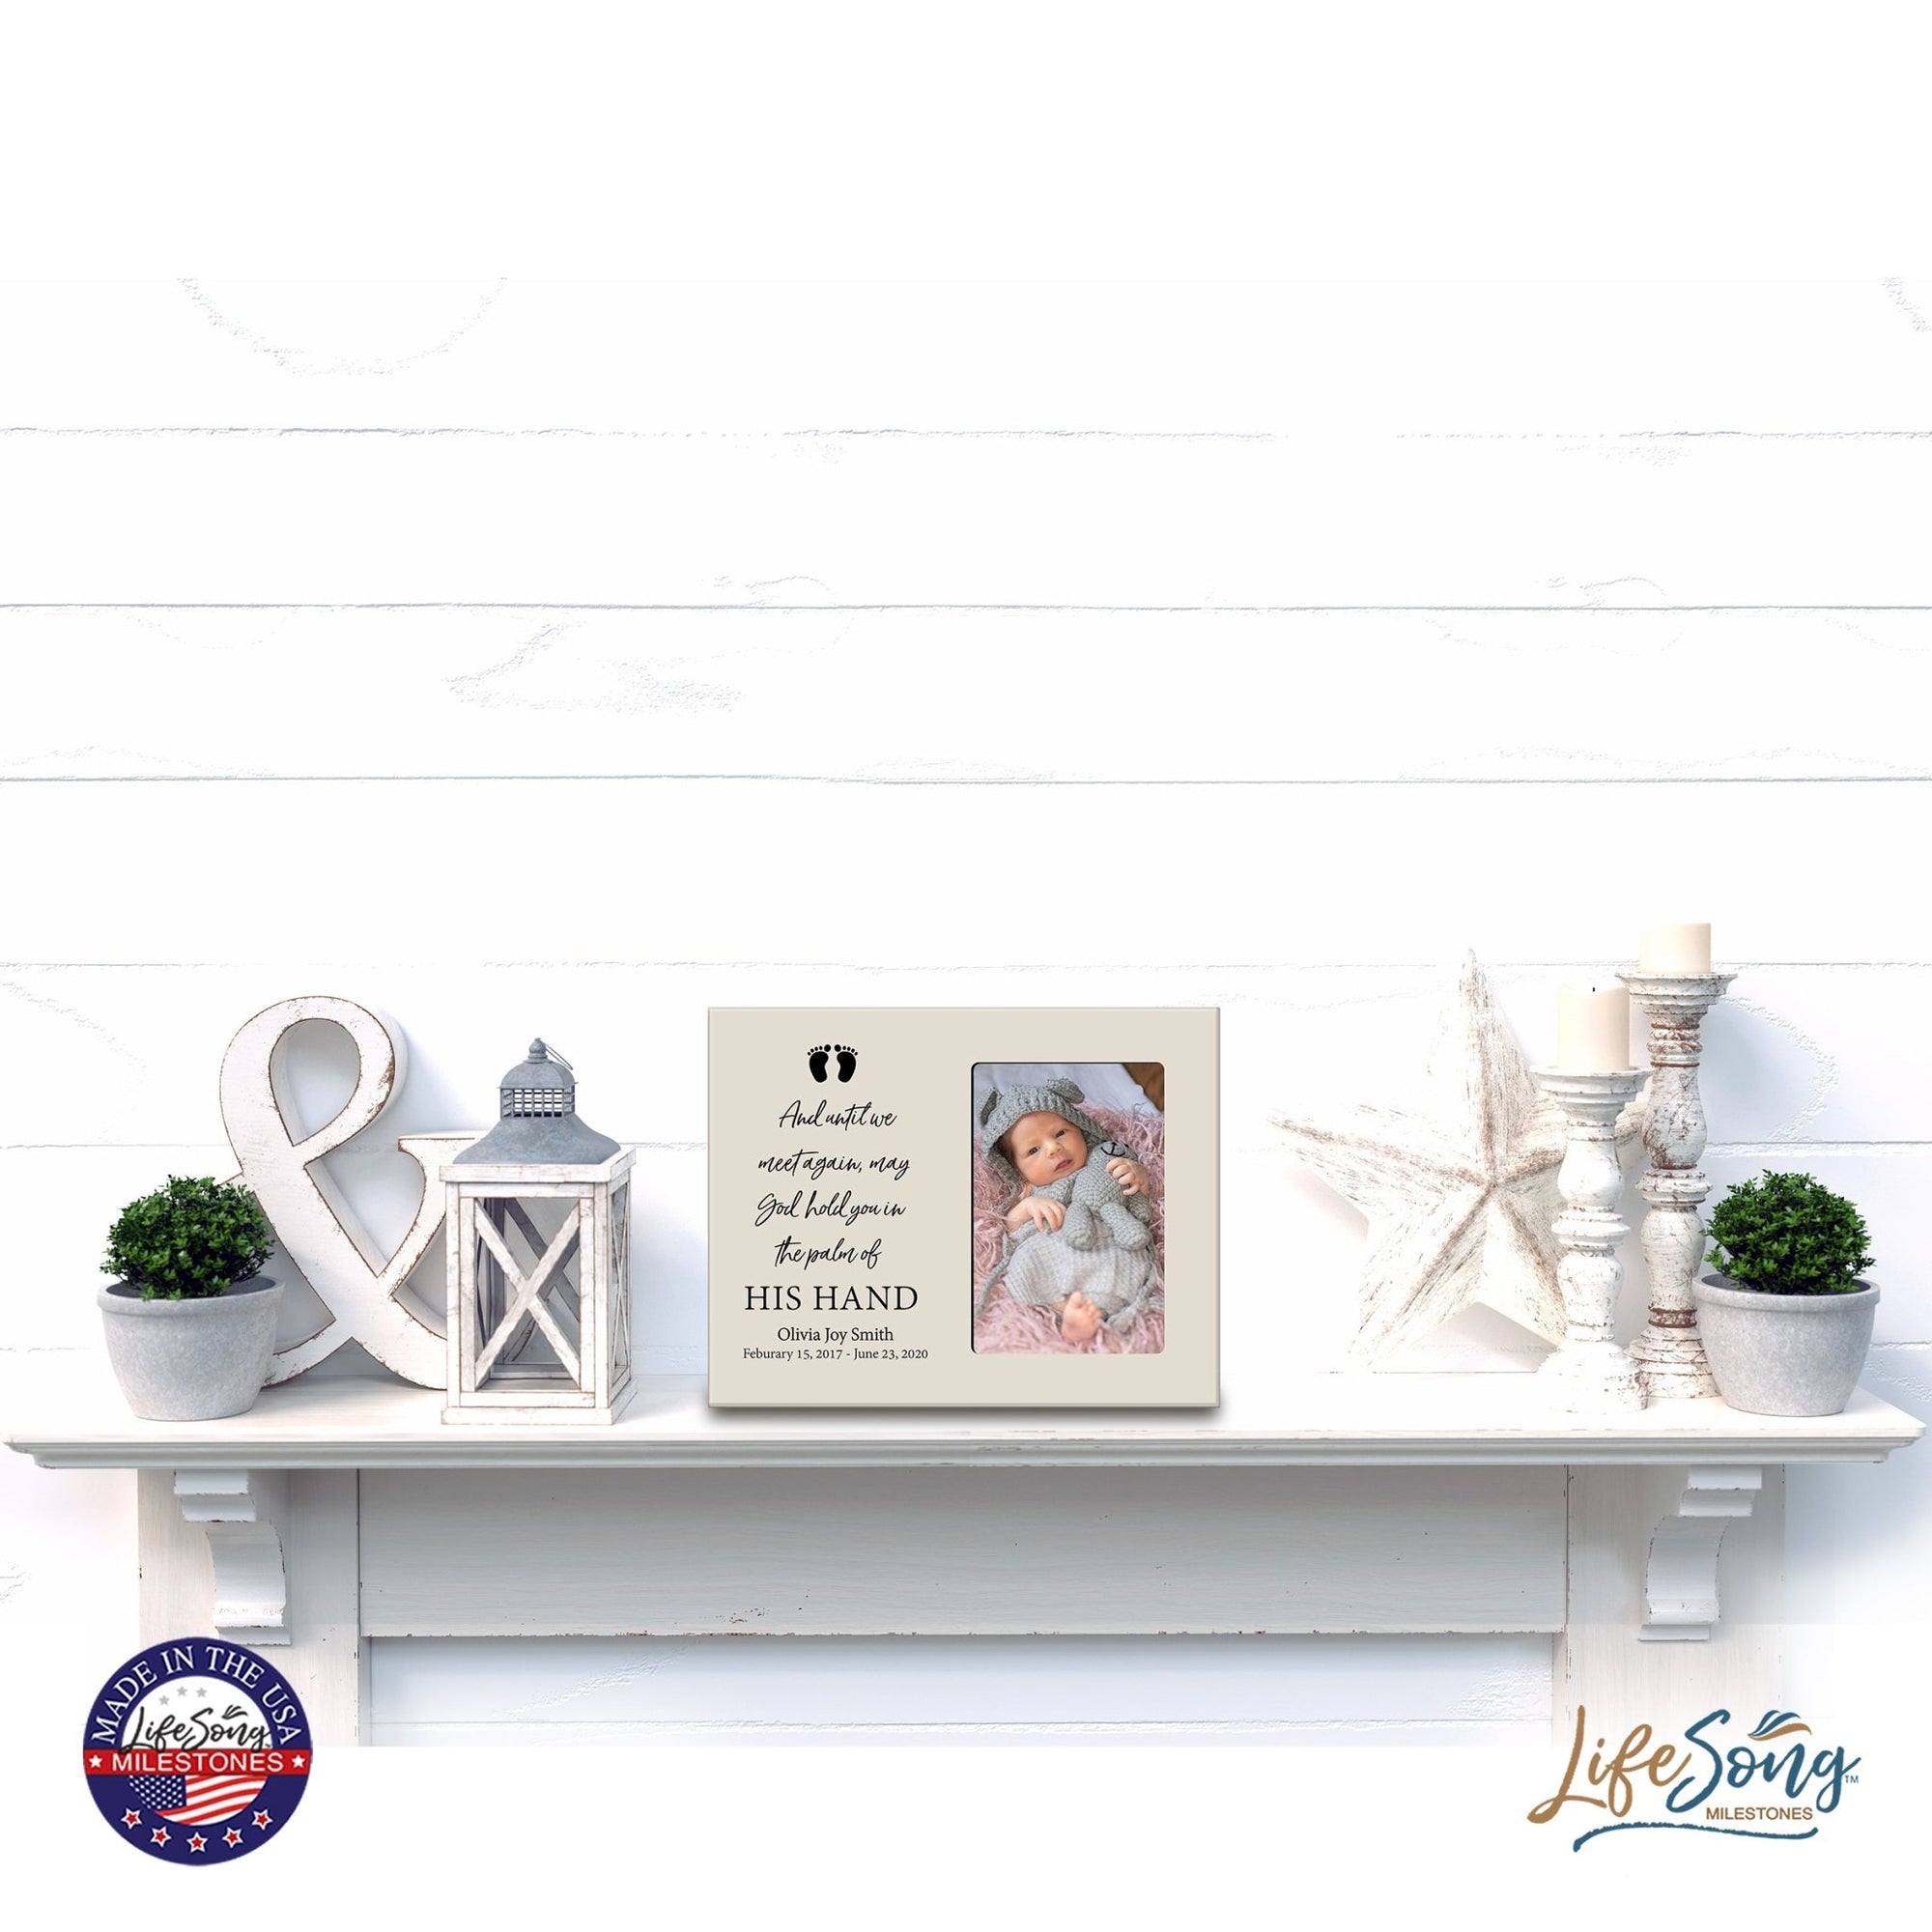 Personalized Wooden Memorial 8x10 Picture Frame holds 4x6 photo for Baby - Until We Meet Again - LifeSong Milestones